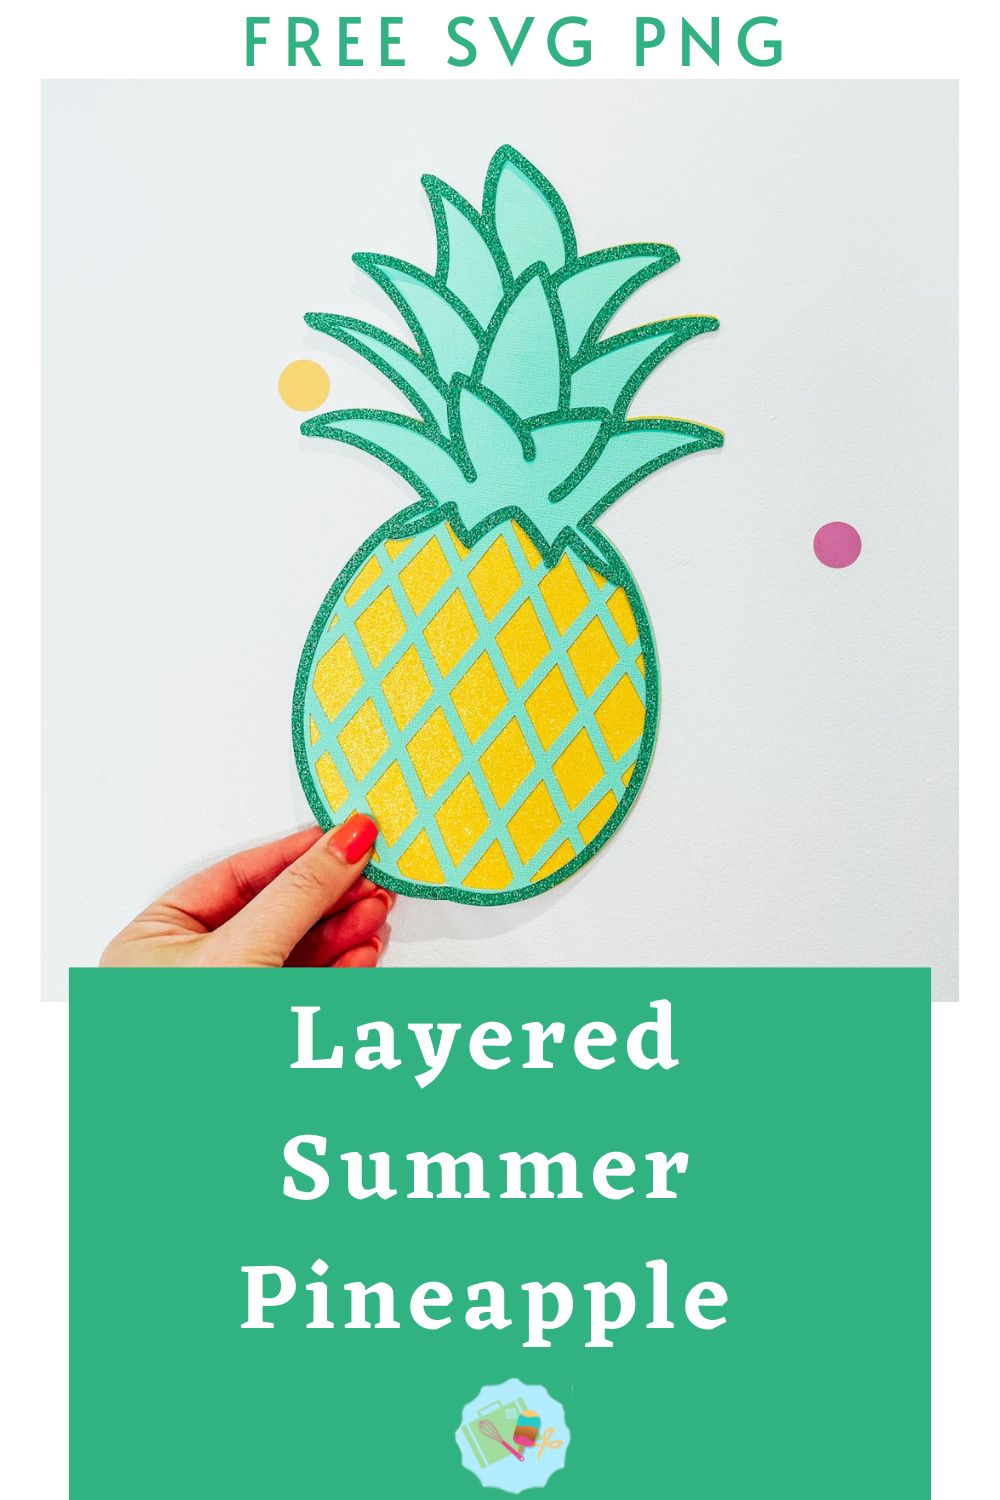 Free SVG Layered Pineapple for Cricut and Silhouette for crafting and scrapbooking